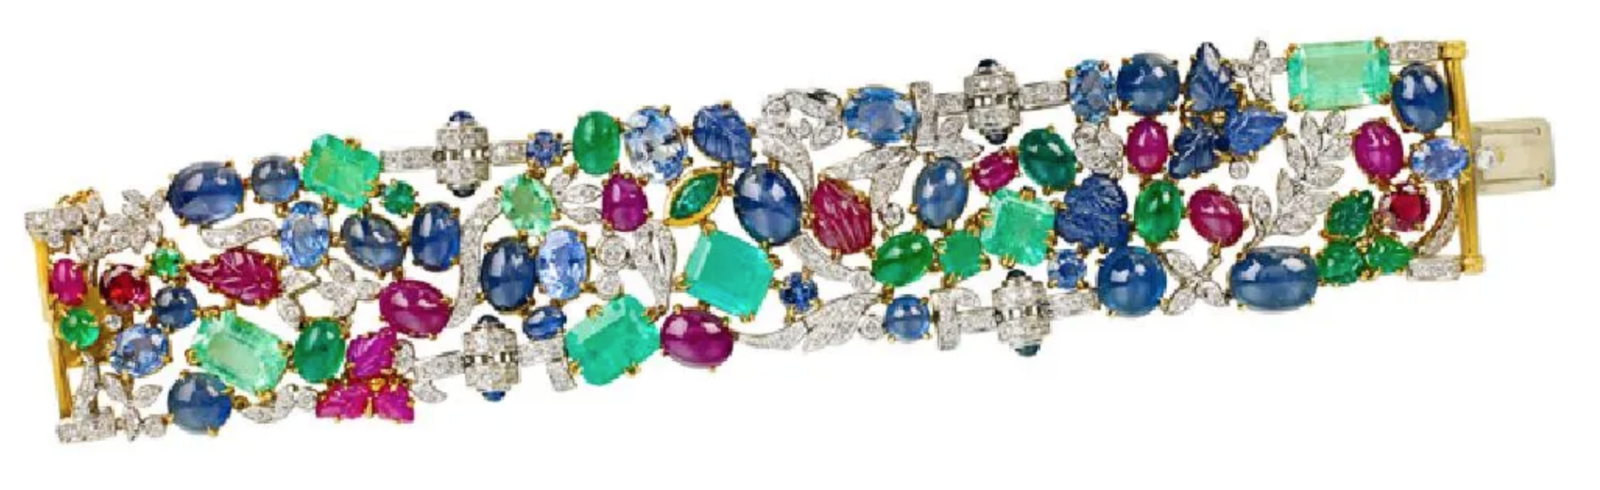 A Seaman Schepps multi-gem and diamond Garden bracelet realized $25,000 plus the buyer’s premium in December 2018. Image courtesy of Rago Arts and Auction Center and LiveAuctioneers.